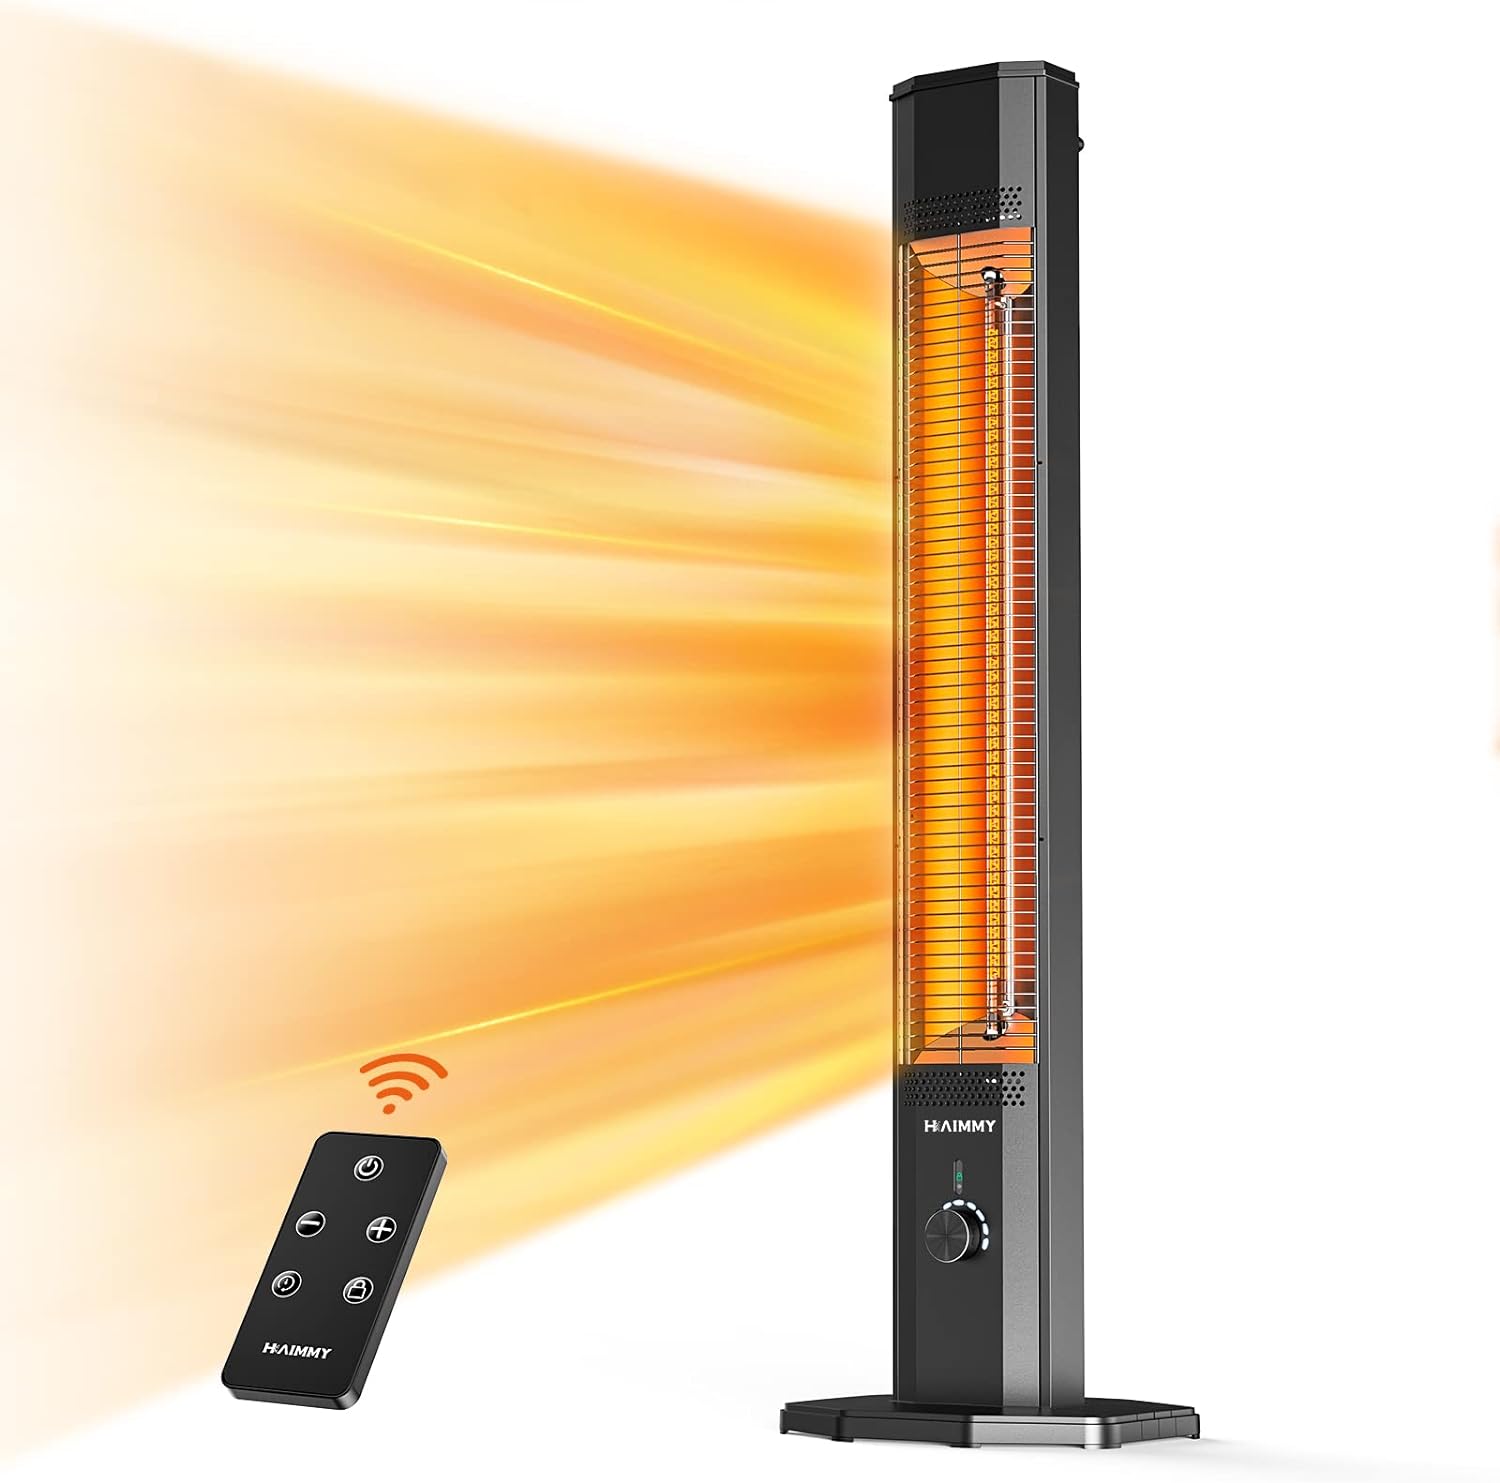 https://bigbigmart.com/wp-content/uploads/2023/11/HAIMMY-Outdoor-Electric-Patio-Heater-Haimmy-42in-Infrared-Heater-with-Remote-9-Heat-Levels-9H-Timers-1500W-Instant-Heating-Safety-Lock-Tip-Over-Overheat-Protection-IPX5-Waterproof-Tower-Space-Heater.jpg